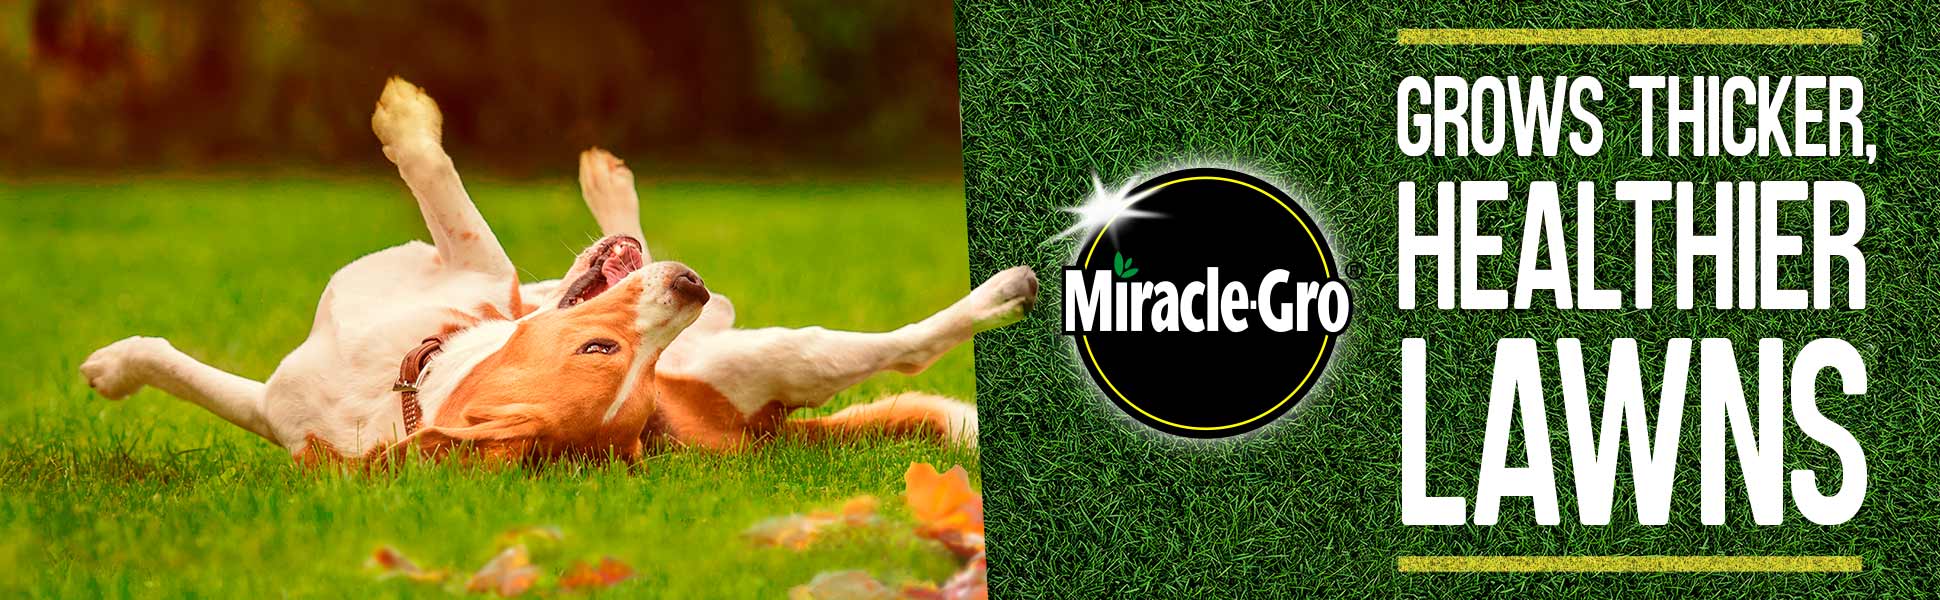 Miracle-Gro® - Grows Thicker, Healthier Lawns